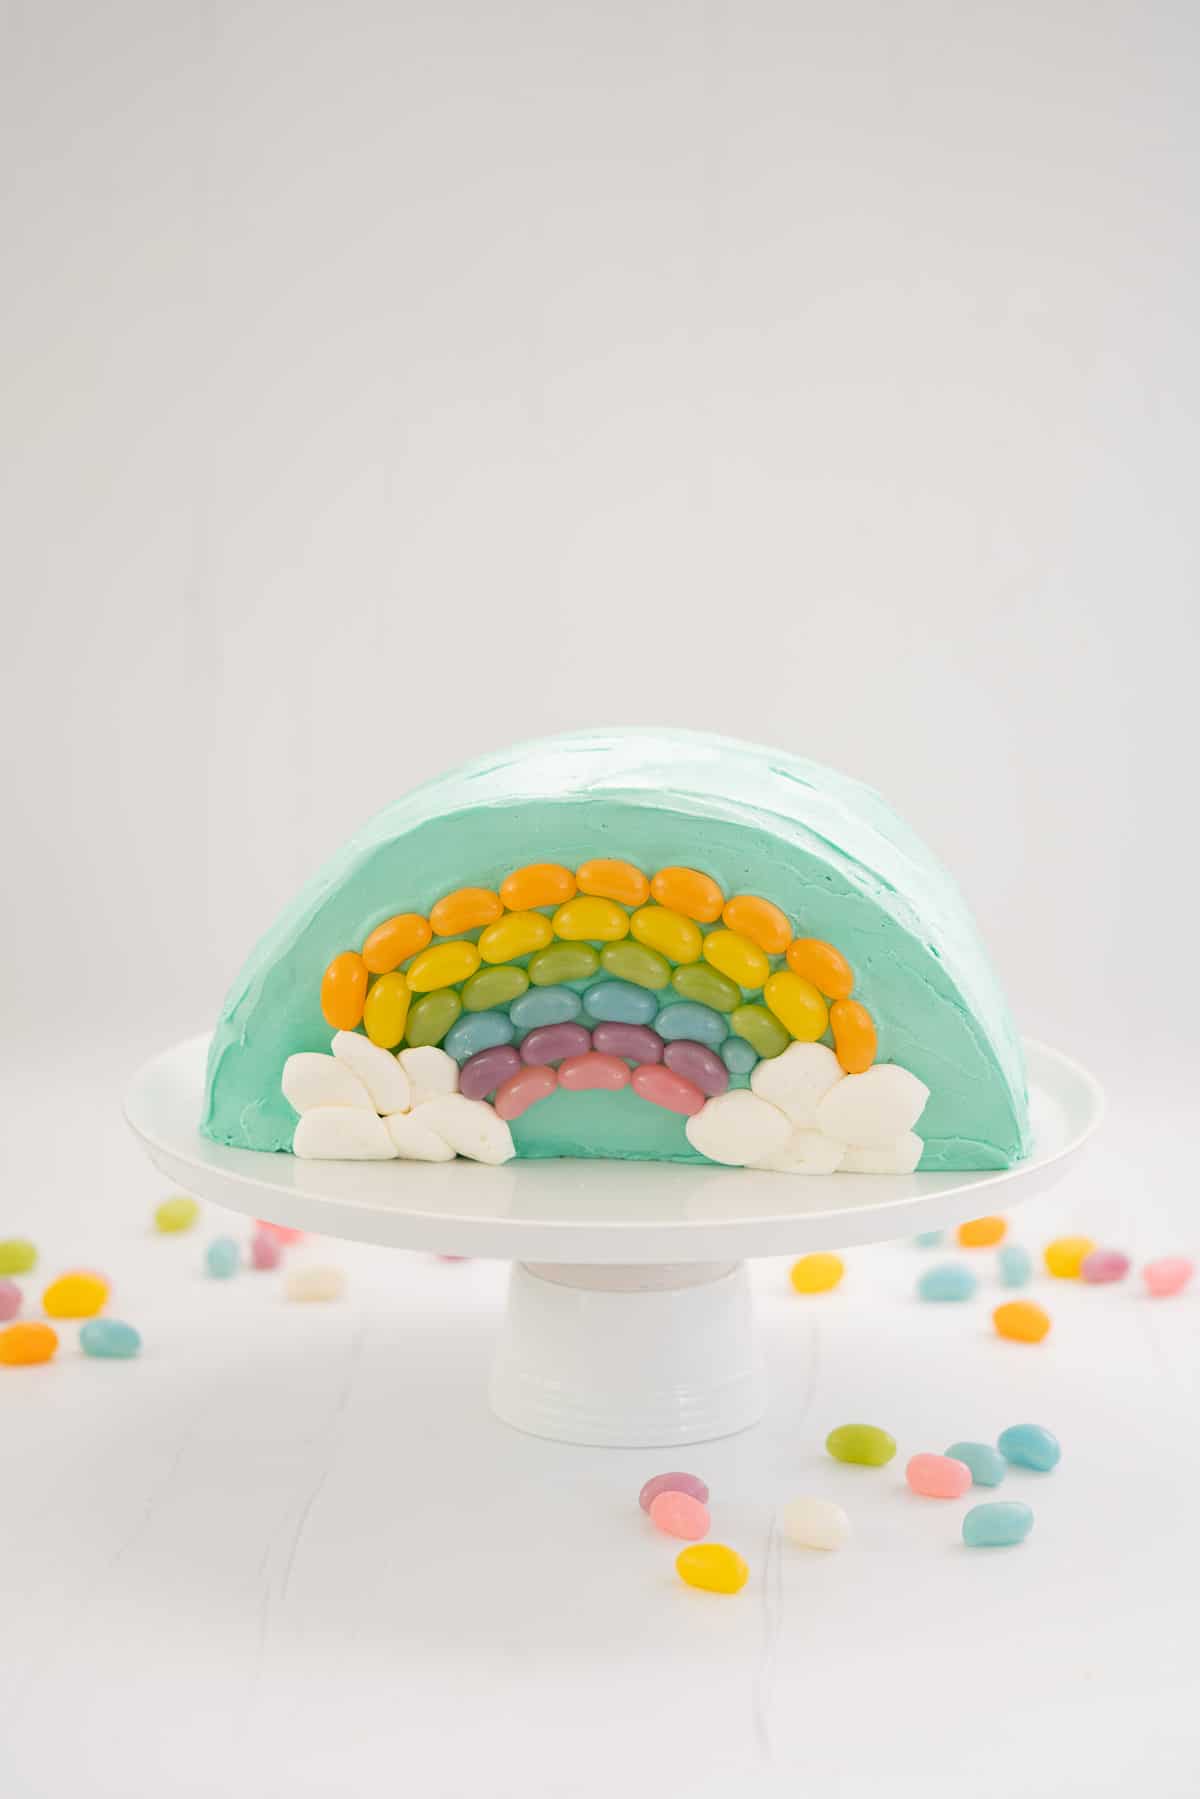 Rainbow Cake: Half round cake standing on a white serving platter decorated with a rainbow of jellybeans.